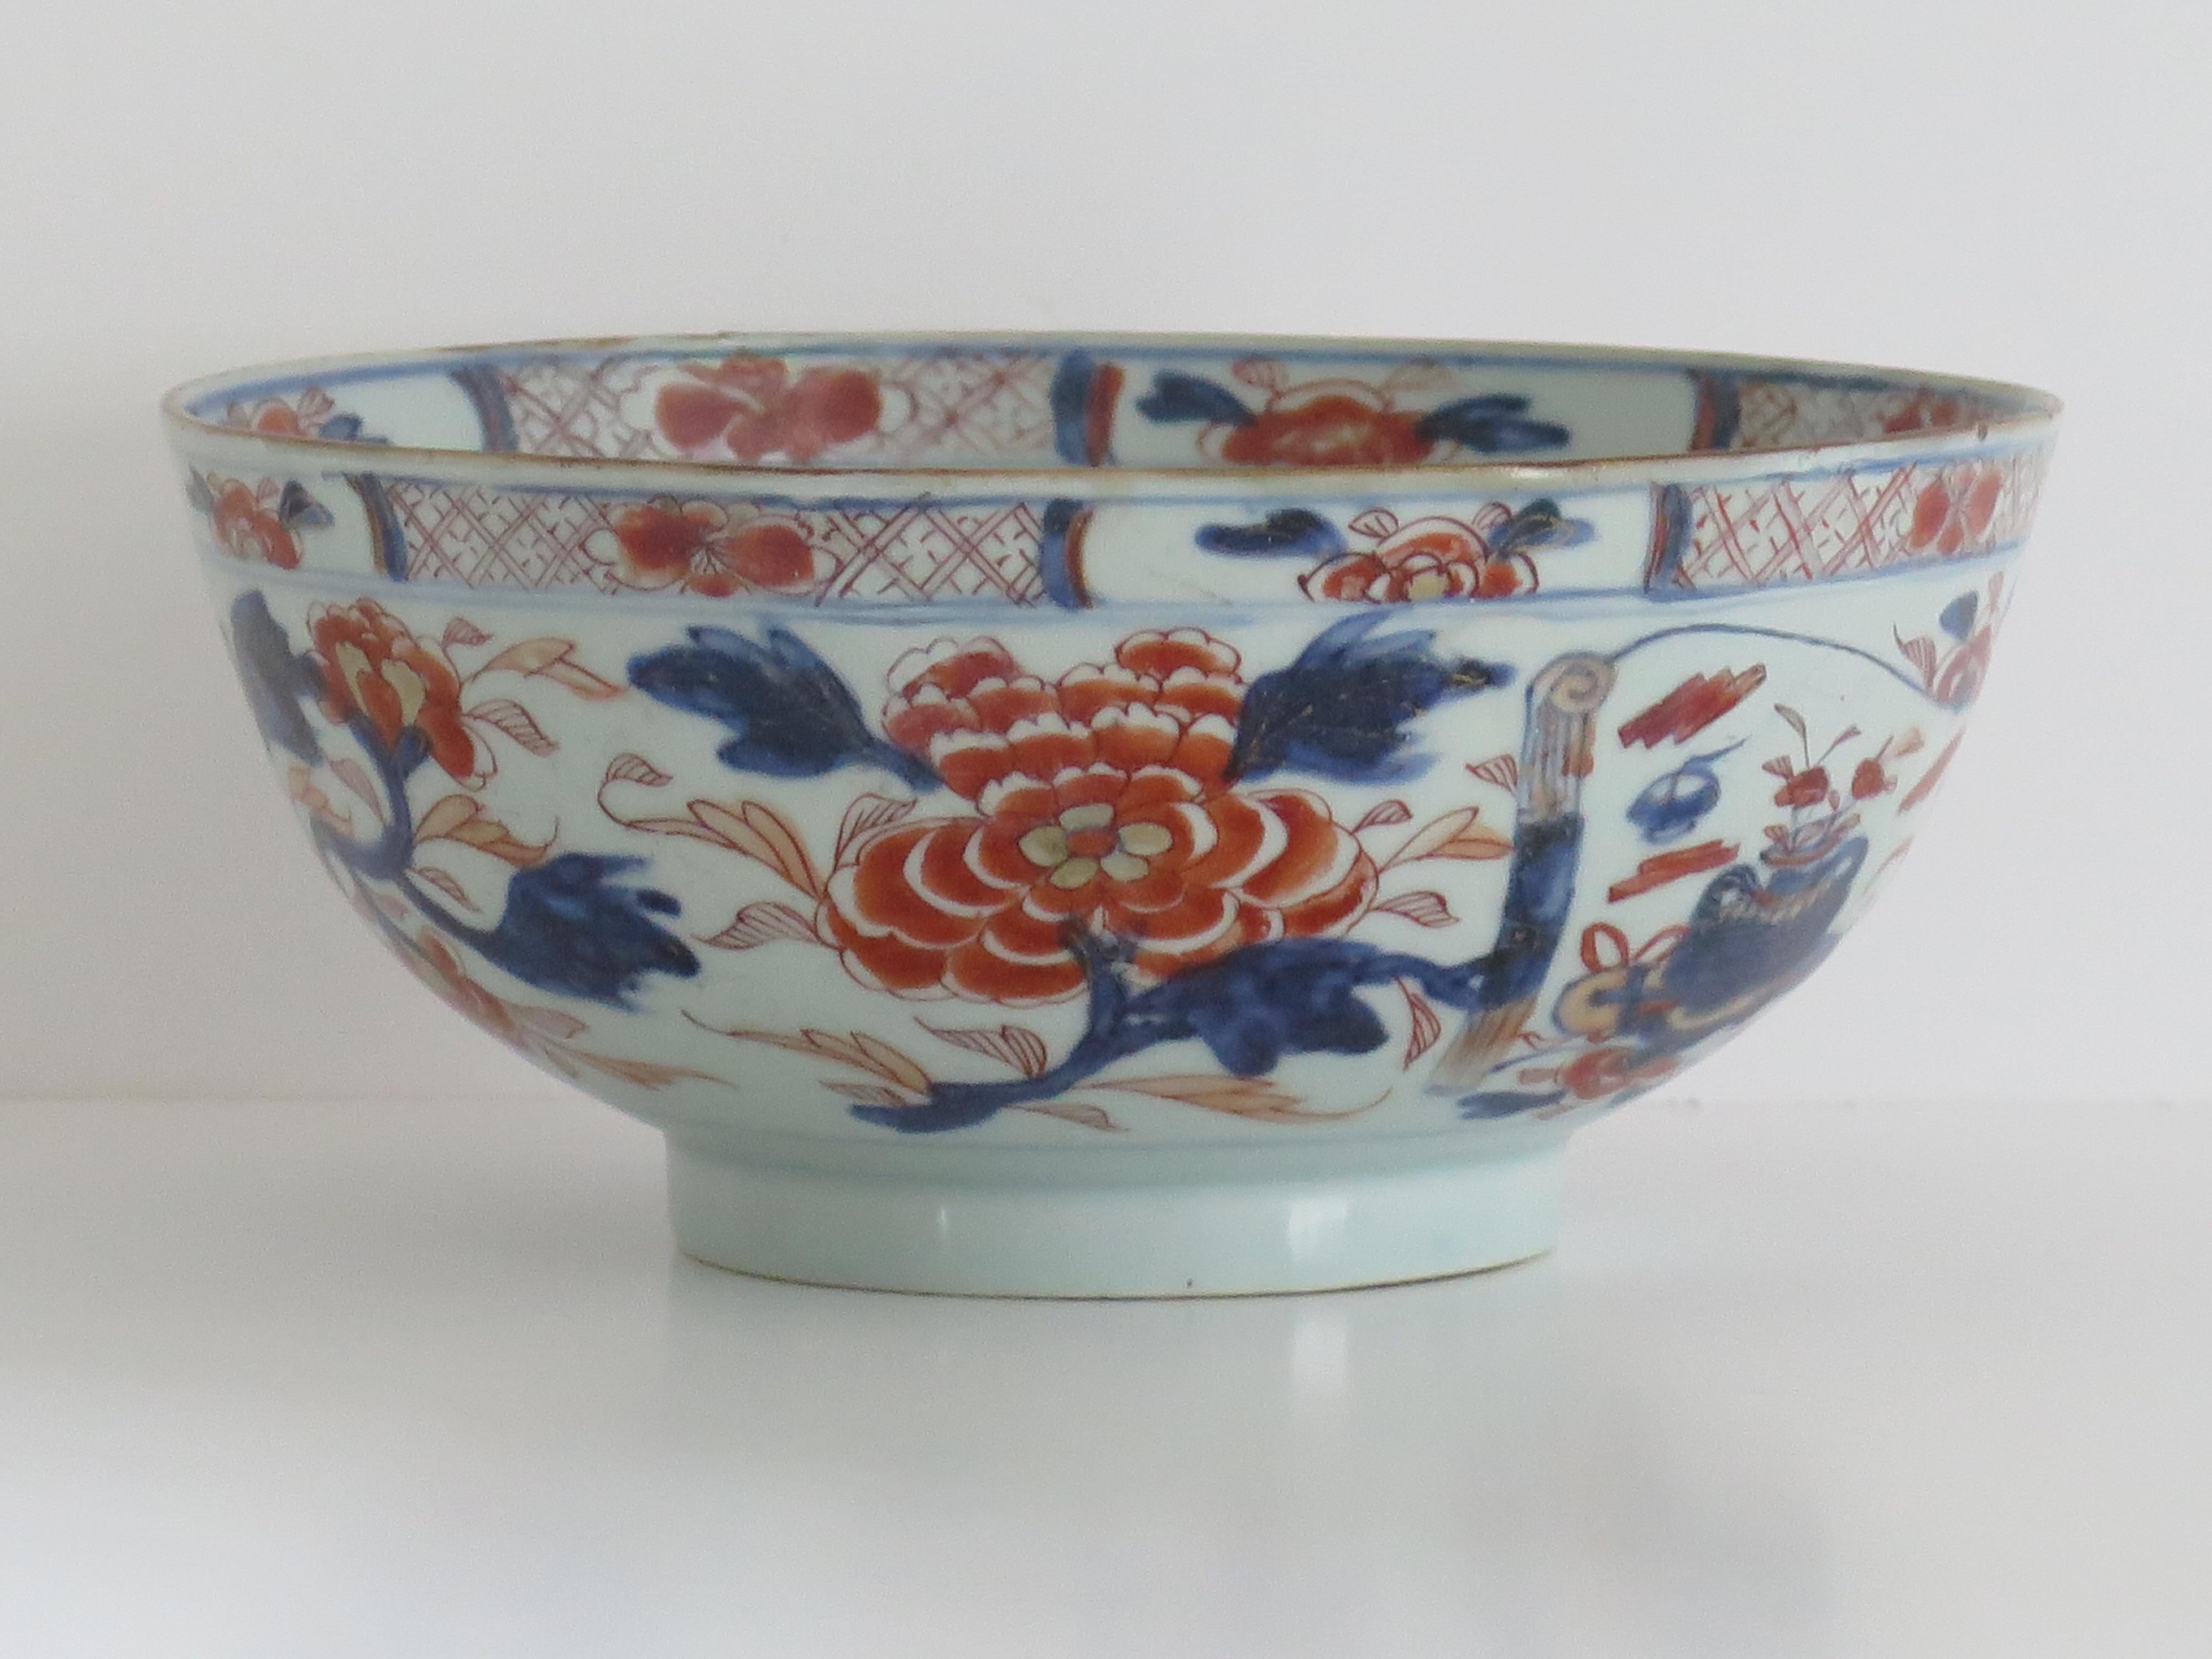 18thc. Chinese Export Porcelain Imari Bowl Hand Painted Qing, Ca 1730 In Good Condition For Sale In Lincoln, Lincolnshire